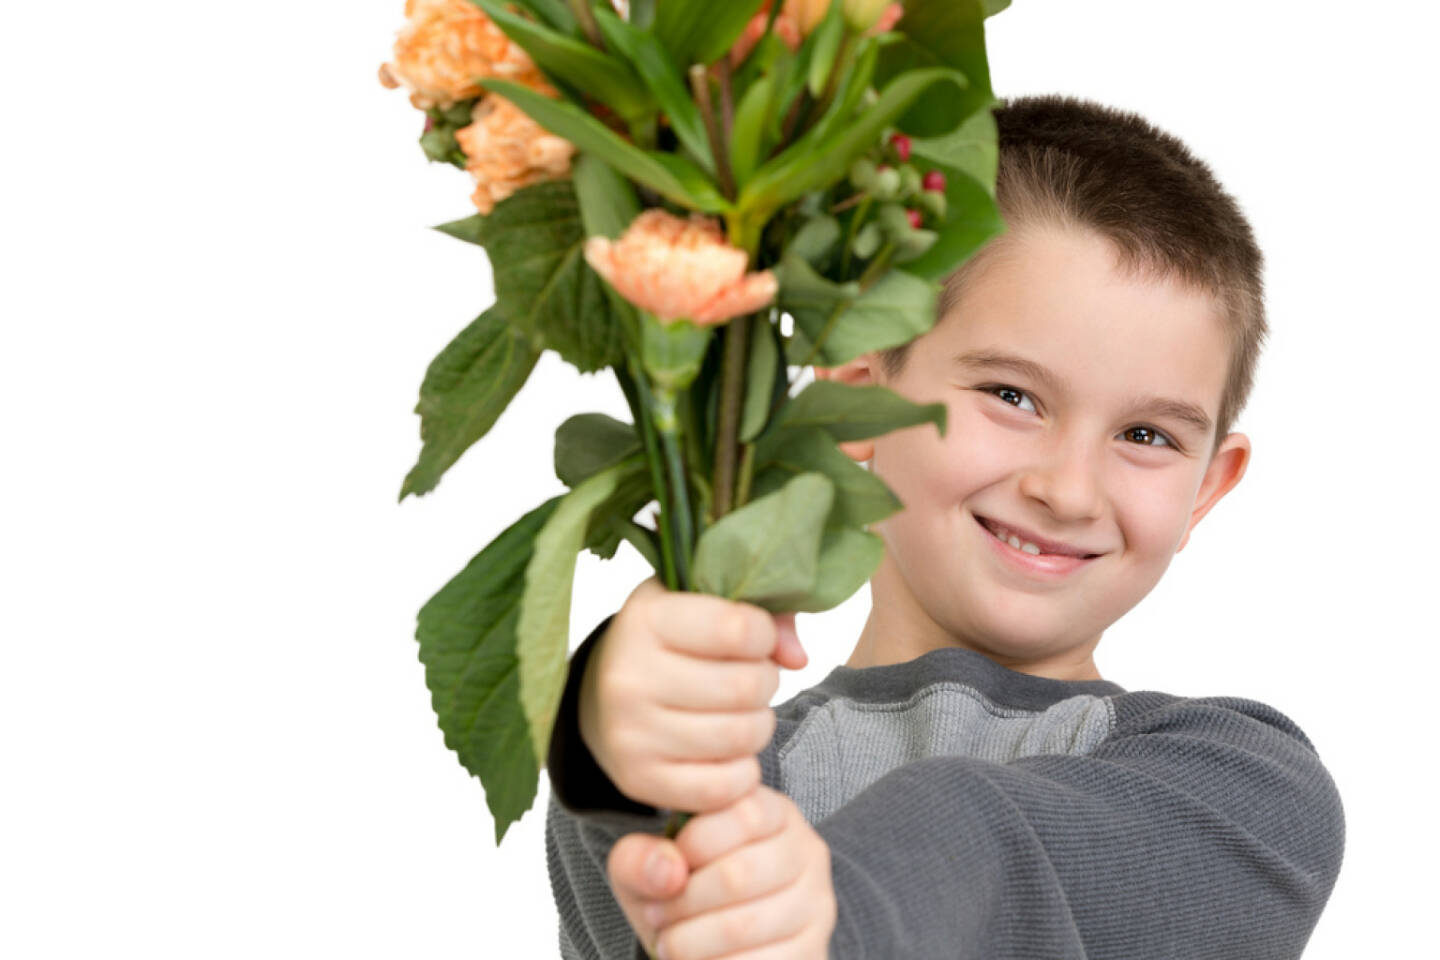 Blumen, Blumenstrauß, Bub, Kind, Junge, Muttertag, freundlich, http://www.shutterstock.com/de/pic-164657984/stock-photo-eight-years-old-boy-presenting-flowers-perhaps-he-is-trying-to-say-sorry-or-its-mothers-day.html